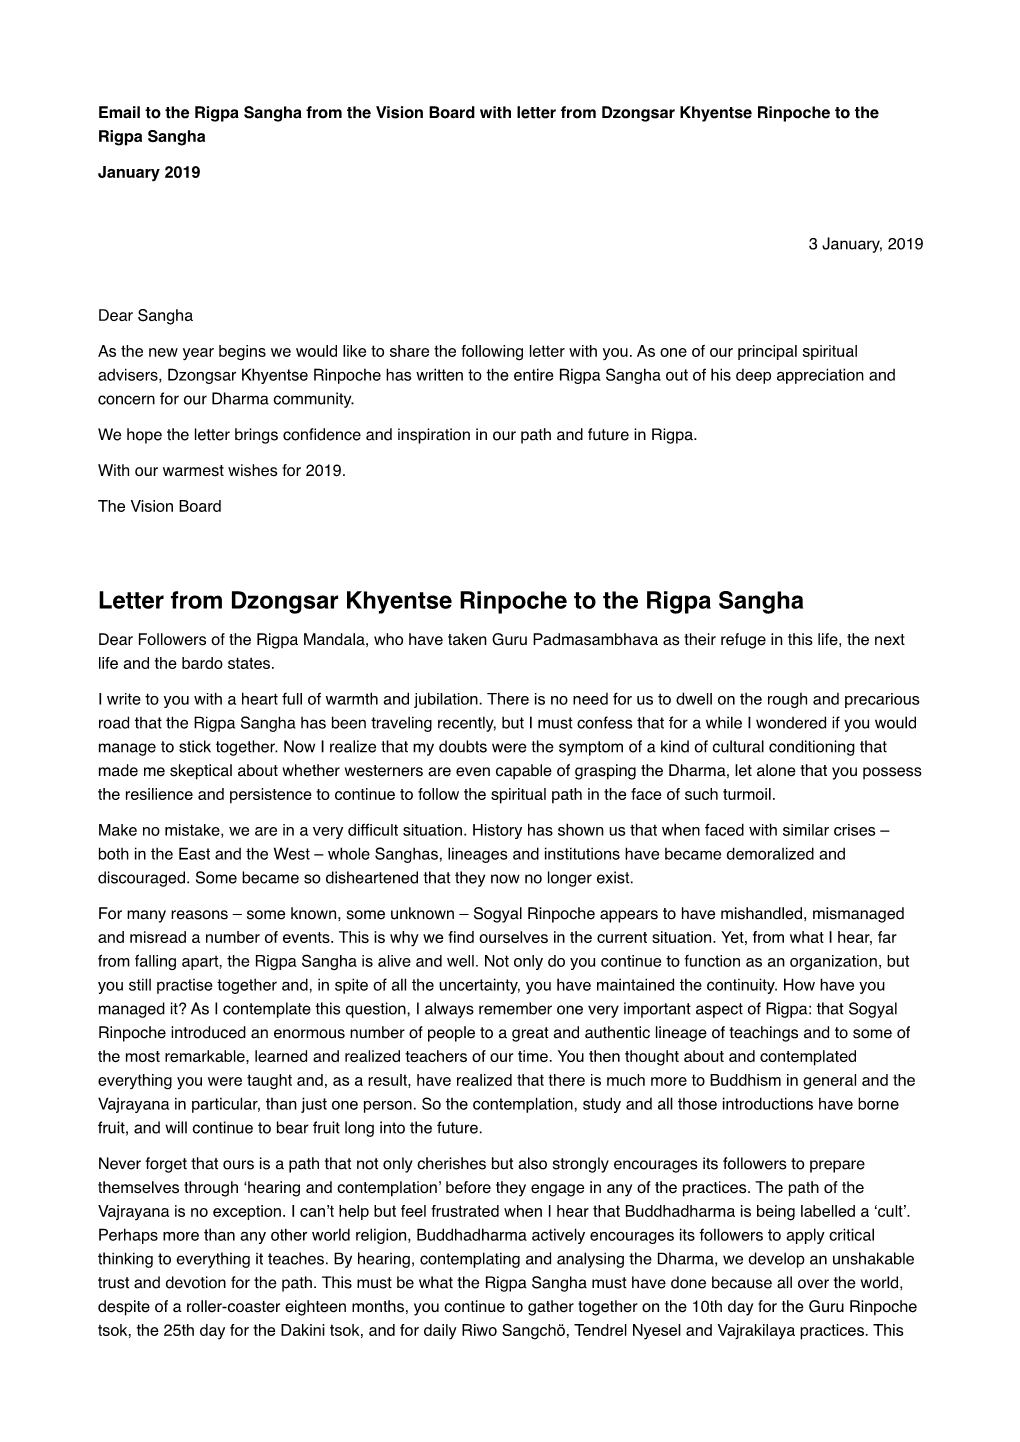 Letter from Dzongsar Khyentse Rinpoche to the Rigpa Sangha